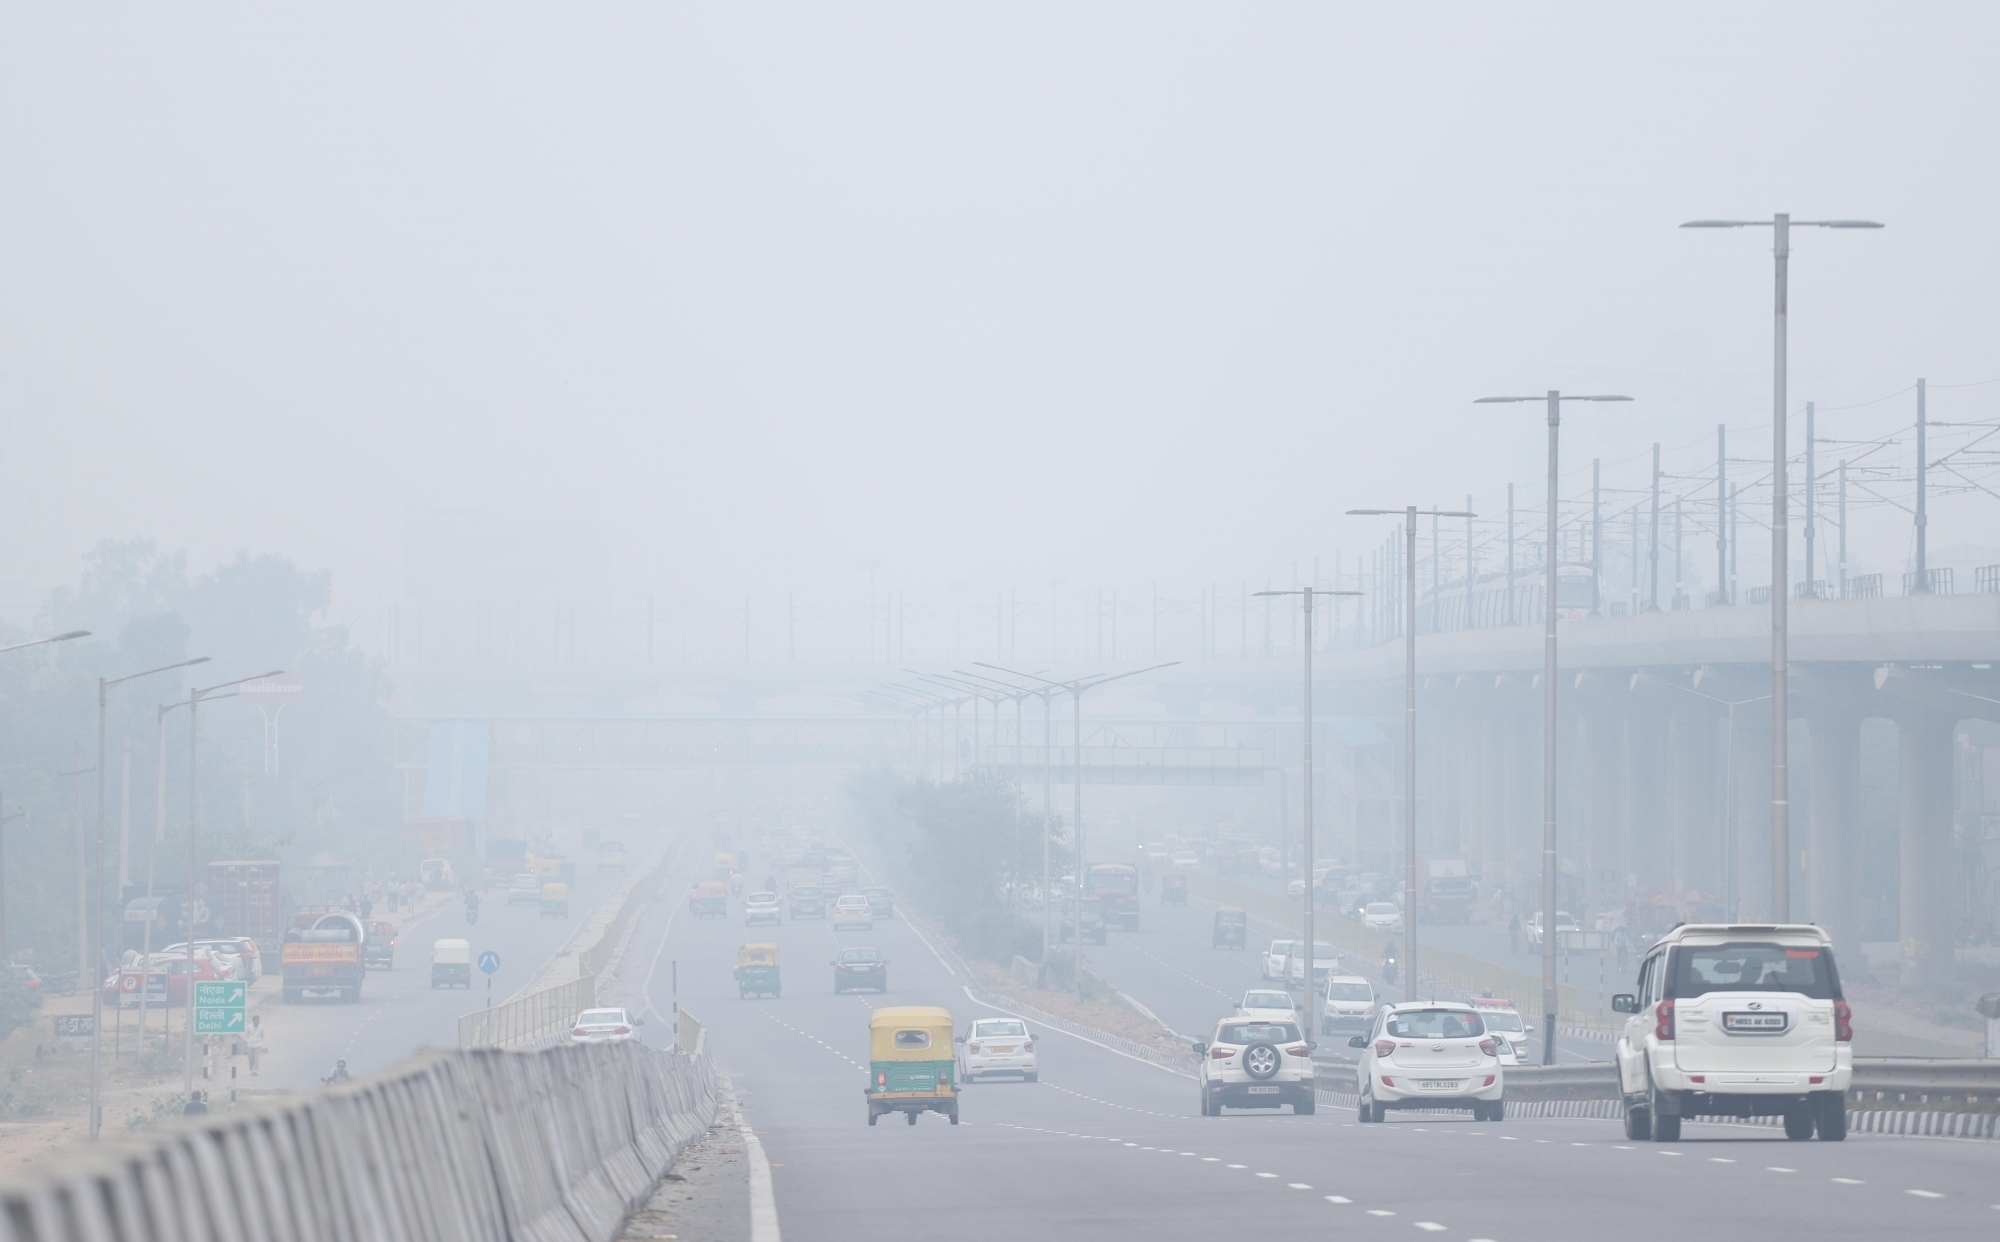 39 of World’s 50 most polluted cities in India: Report